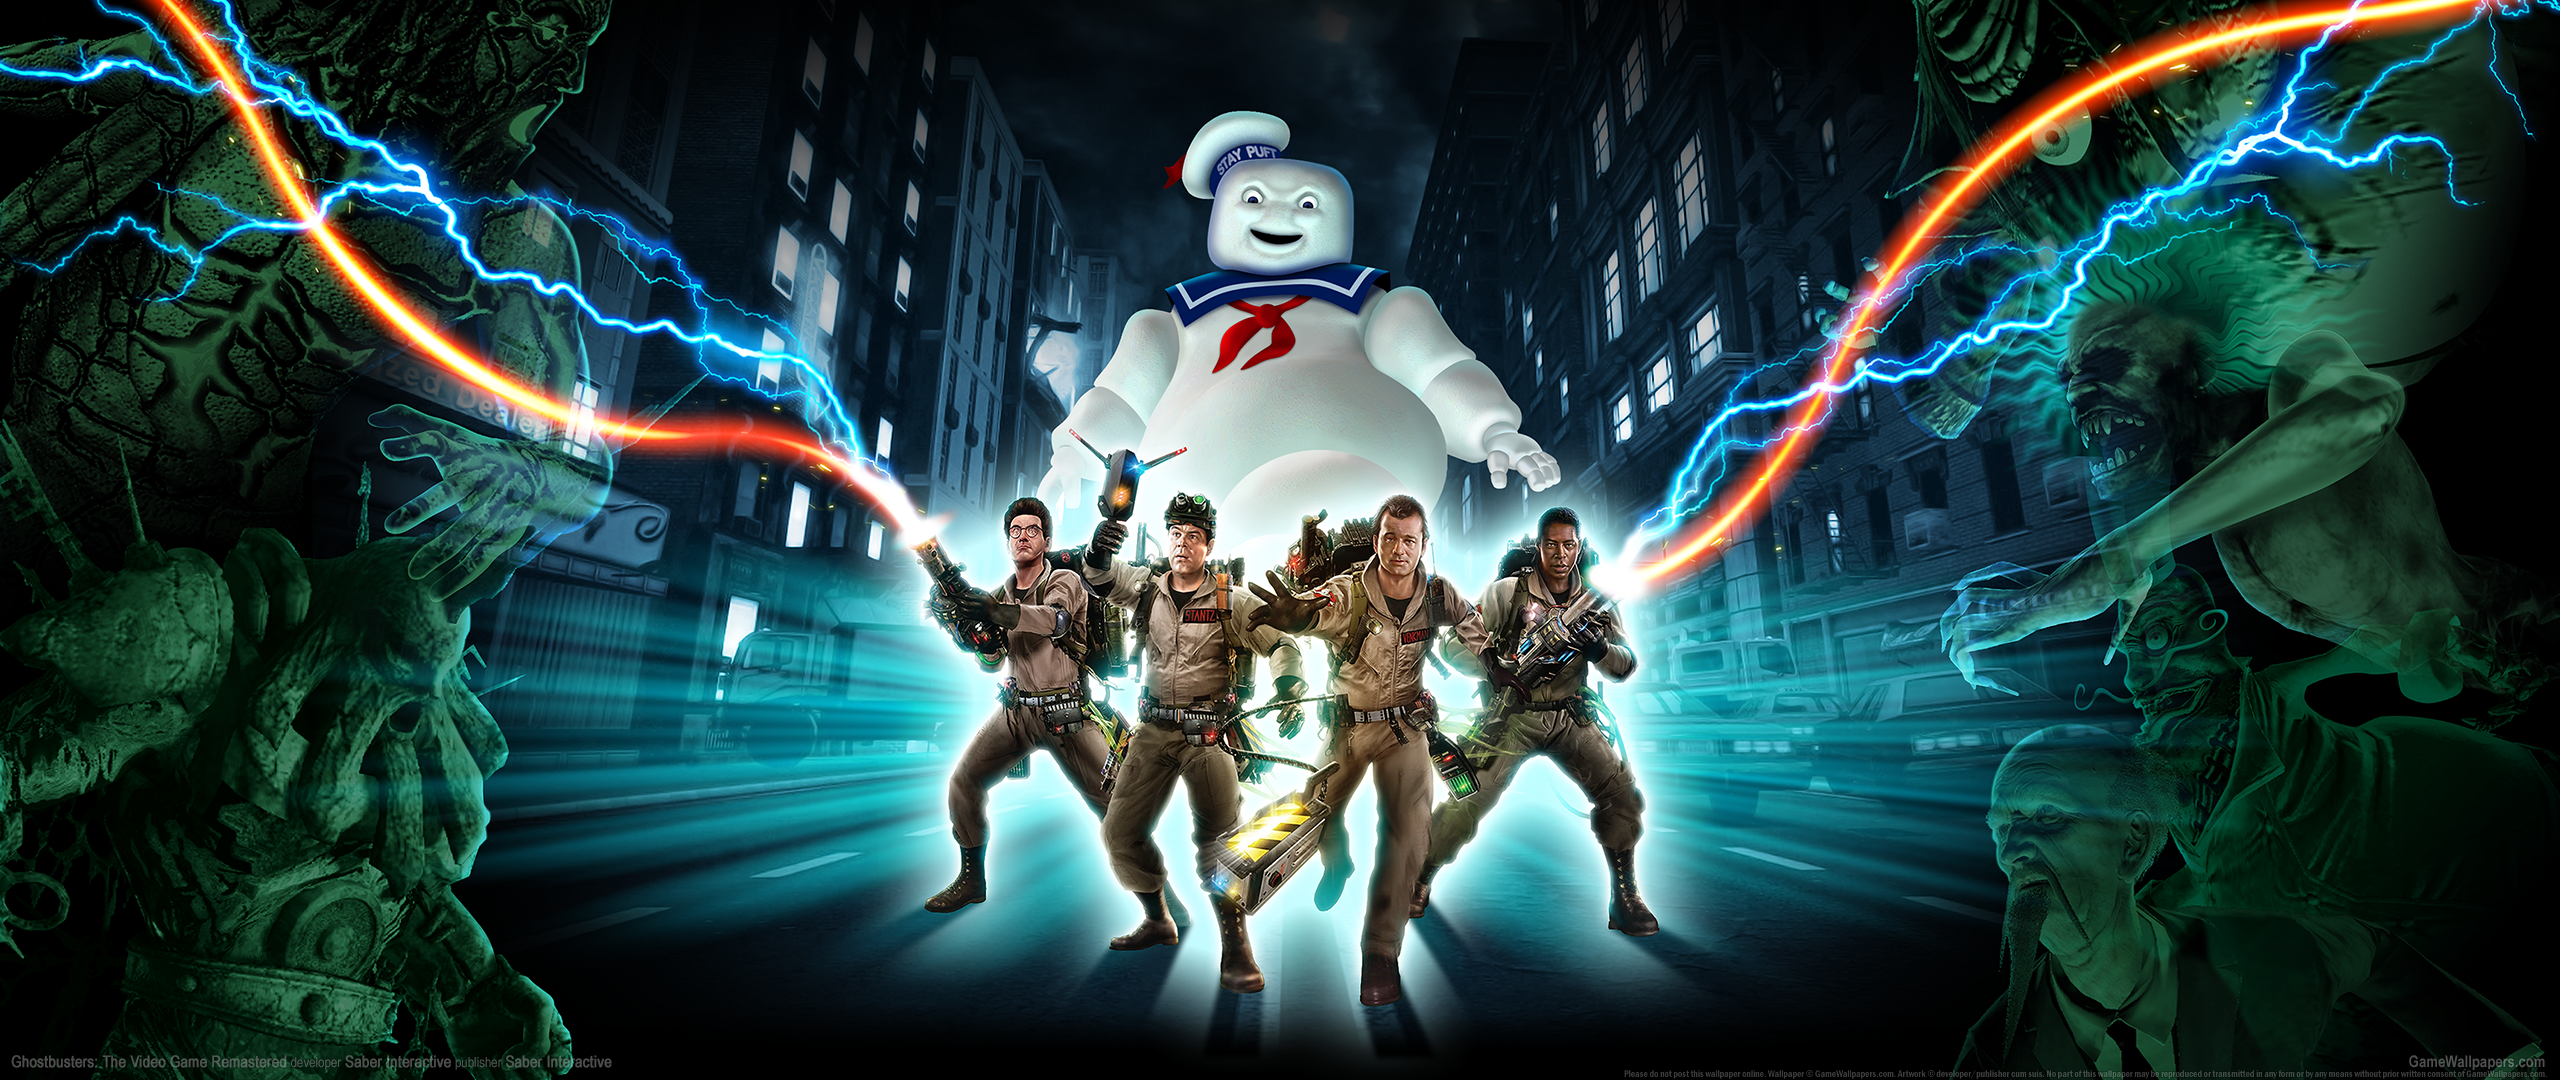 Ghostbusters: The Video Game Remastered 2560x1080 wallpaper or background 01